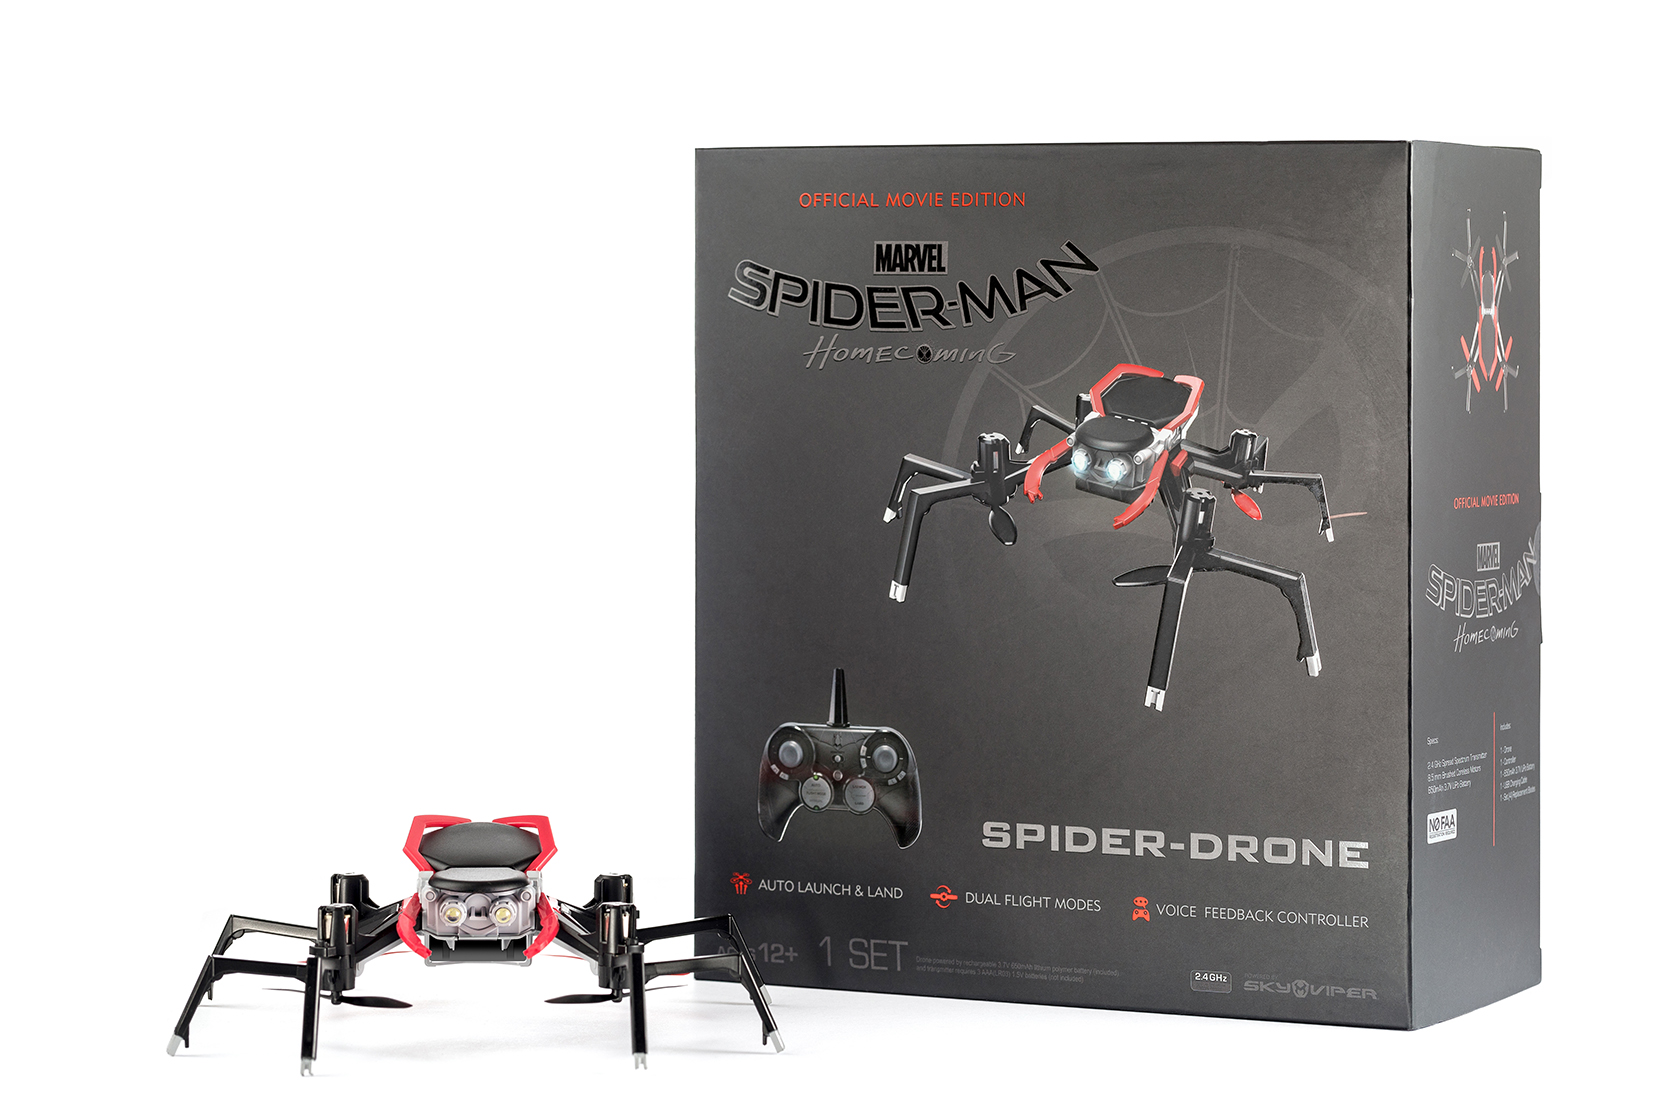 Marvel Spider-Man Homecoming - Official Movie Edition Spider Drone from Skyrocket